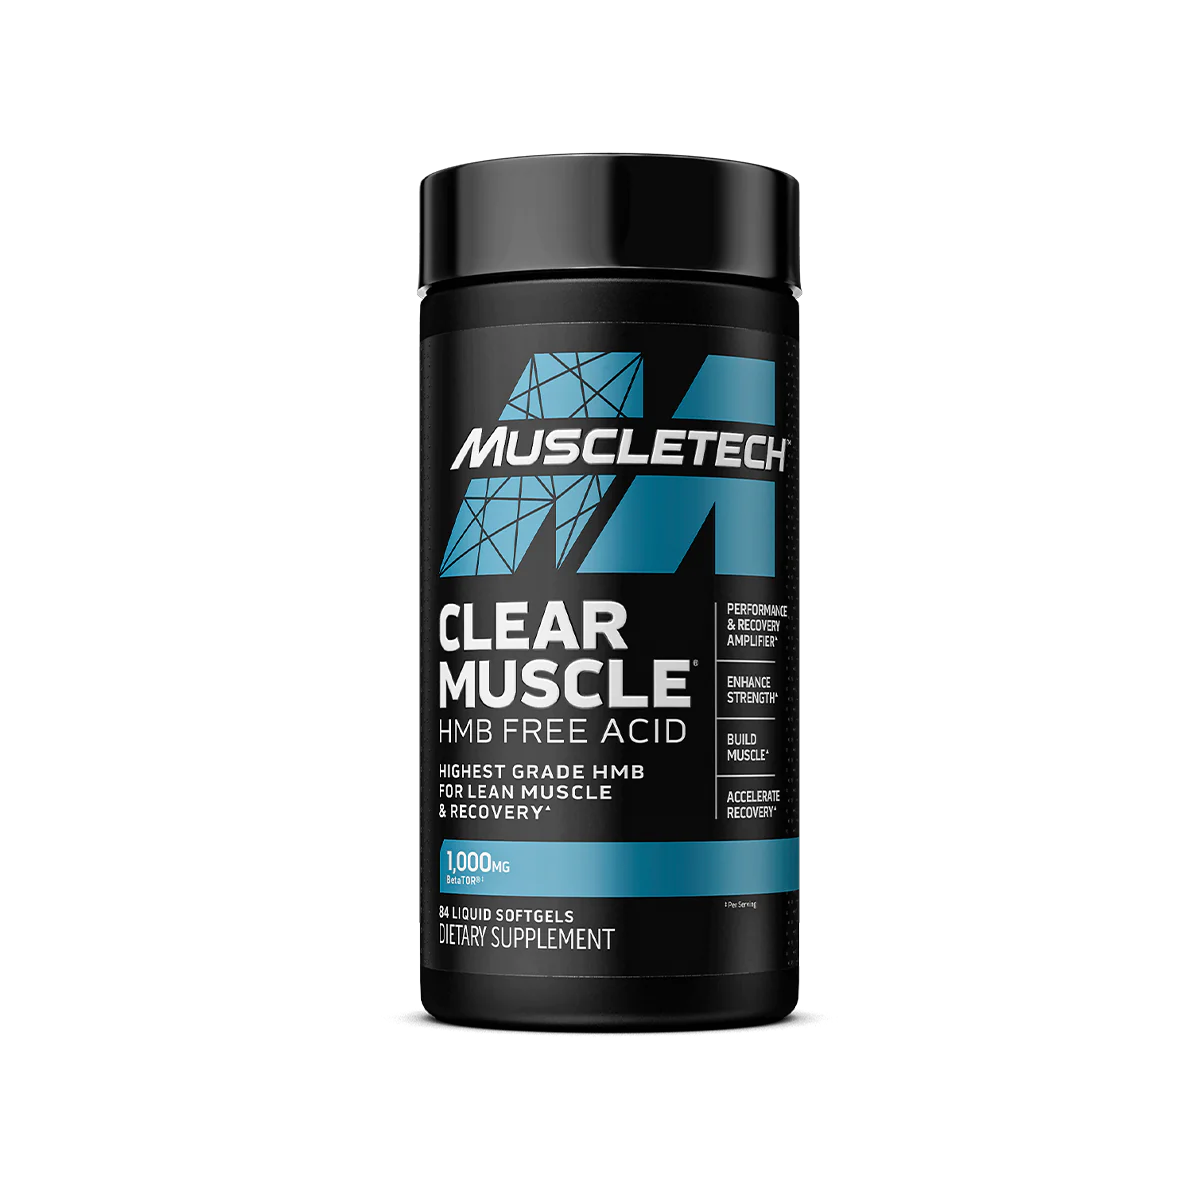 CLEAR MUSCLE Max Muscle Orlando